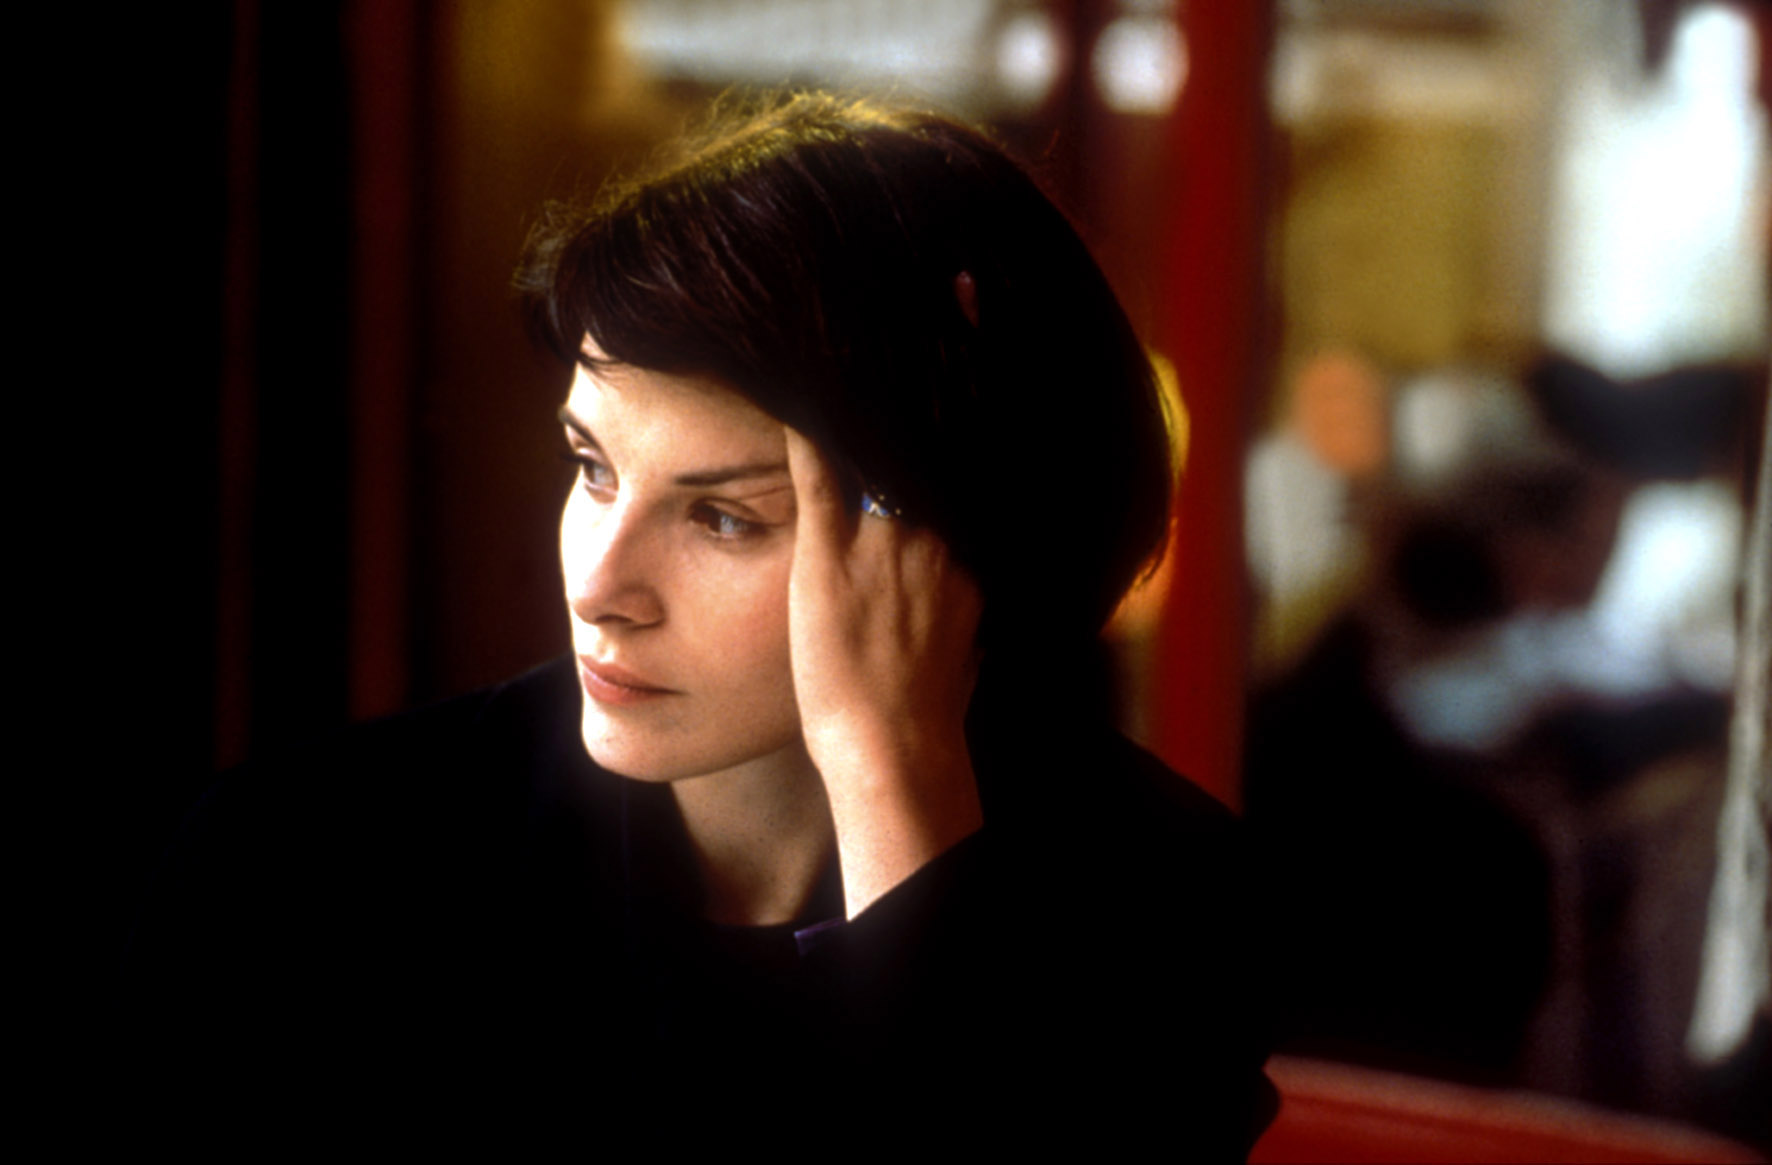 Juliette Binoche on Courageous Acting: ‘If You’re Not Ready to Give Yourself, Change Jobs’